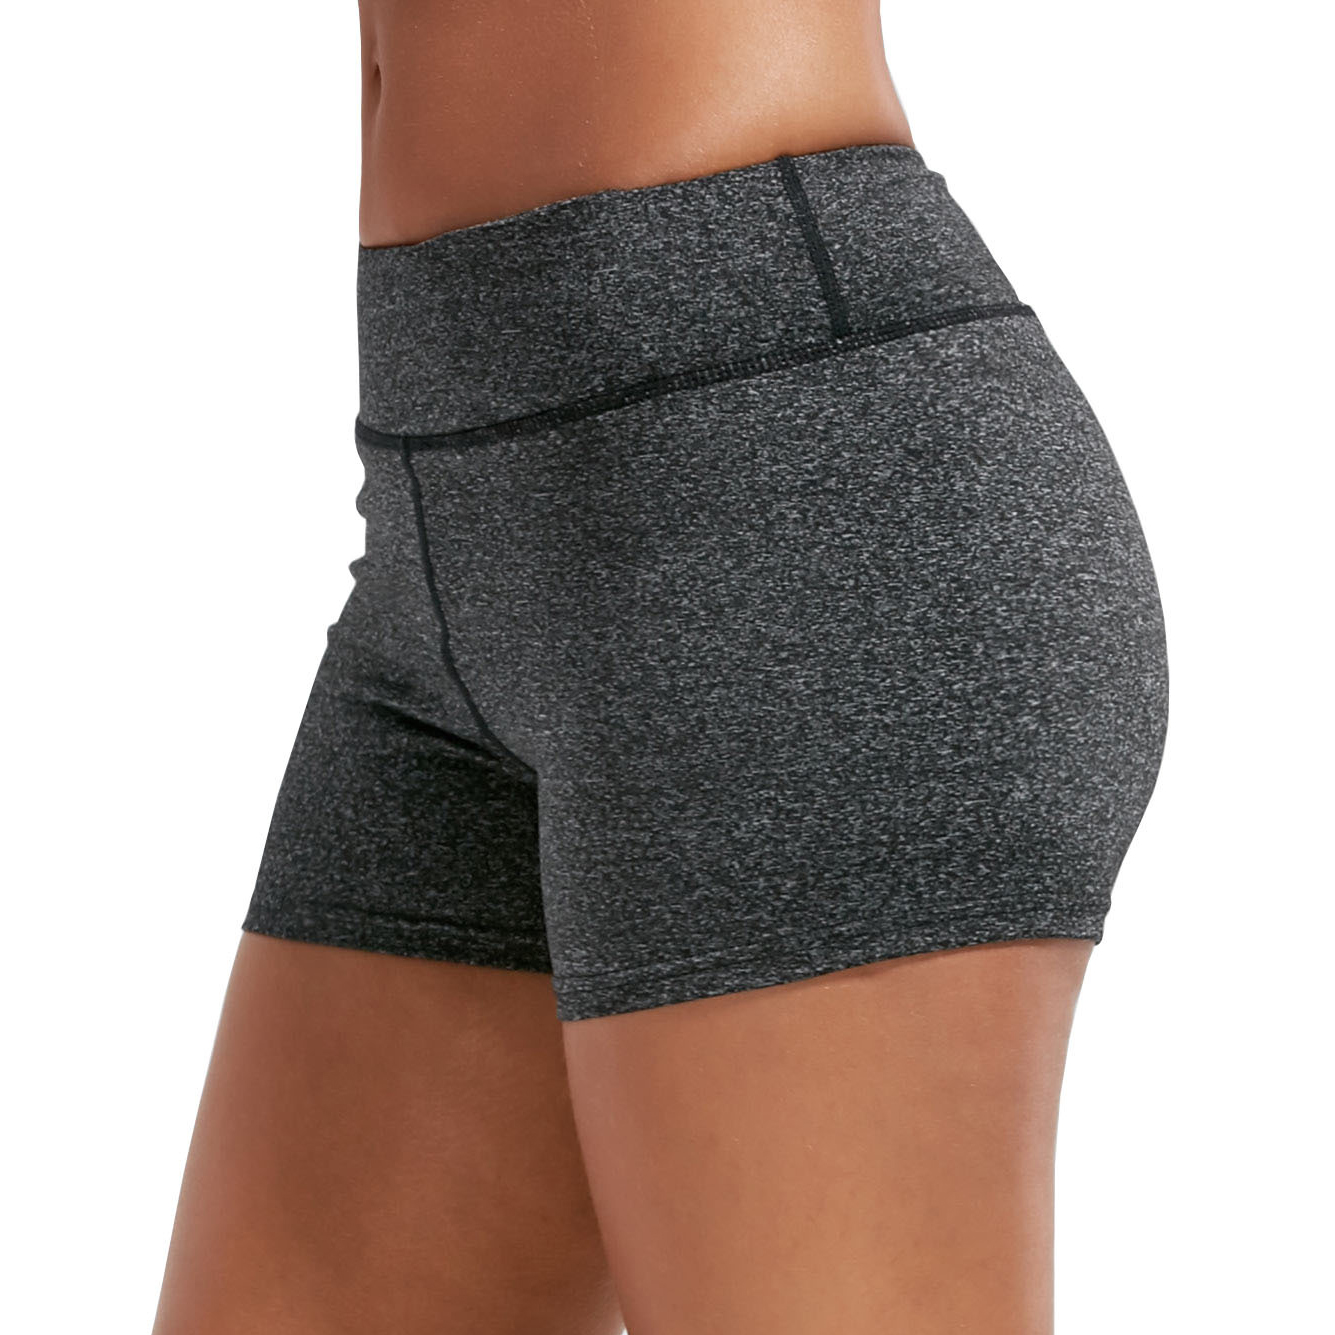 produce women's activewear shorts manufacture